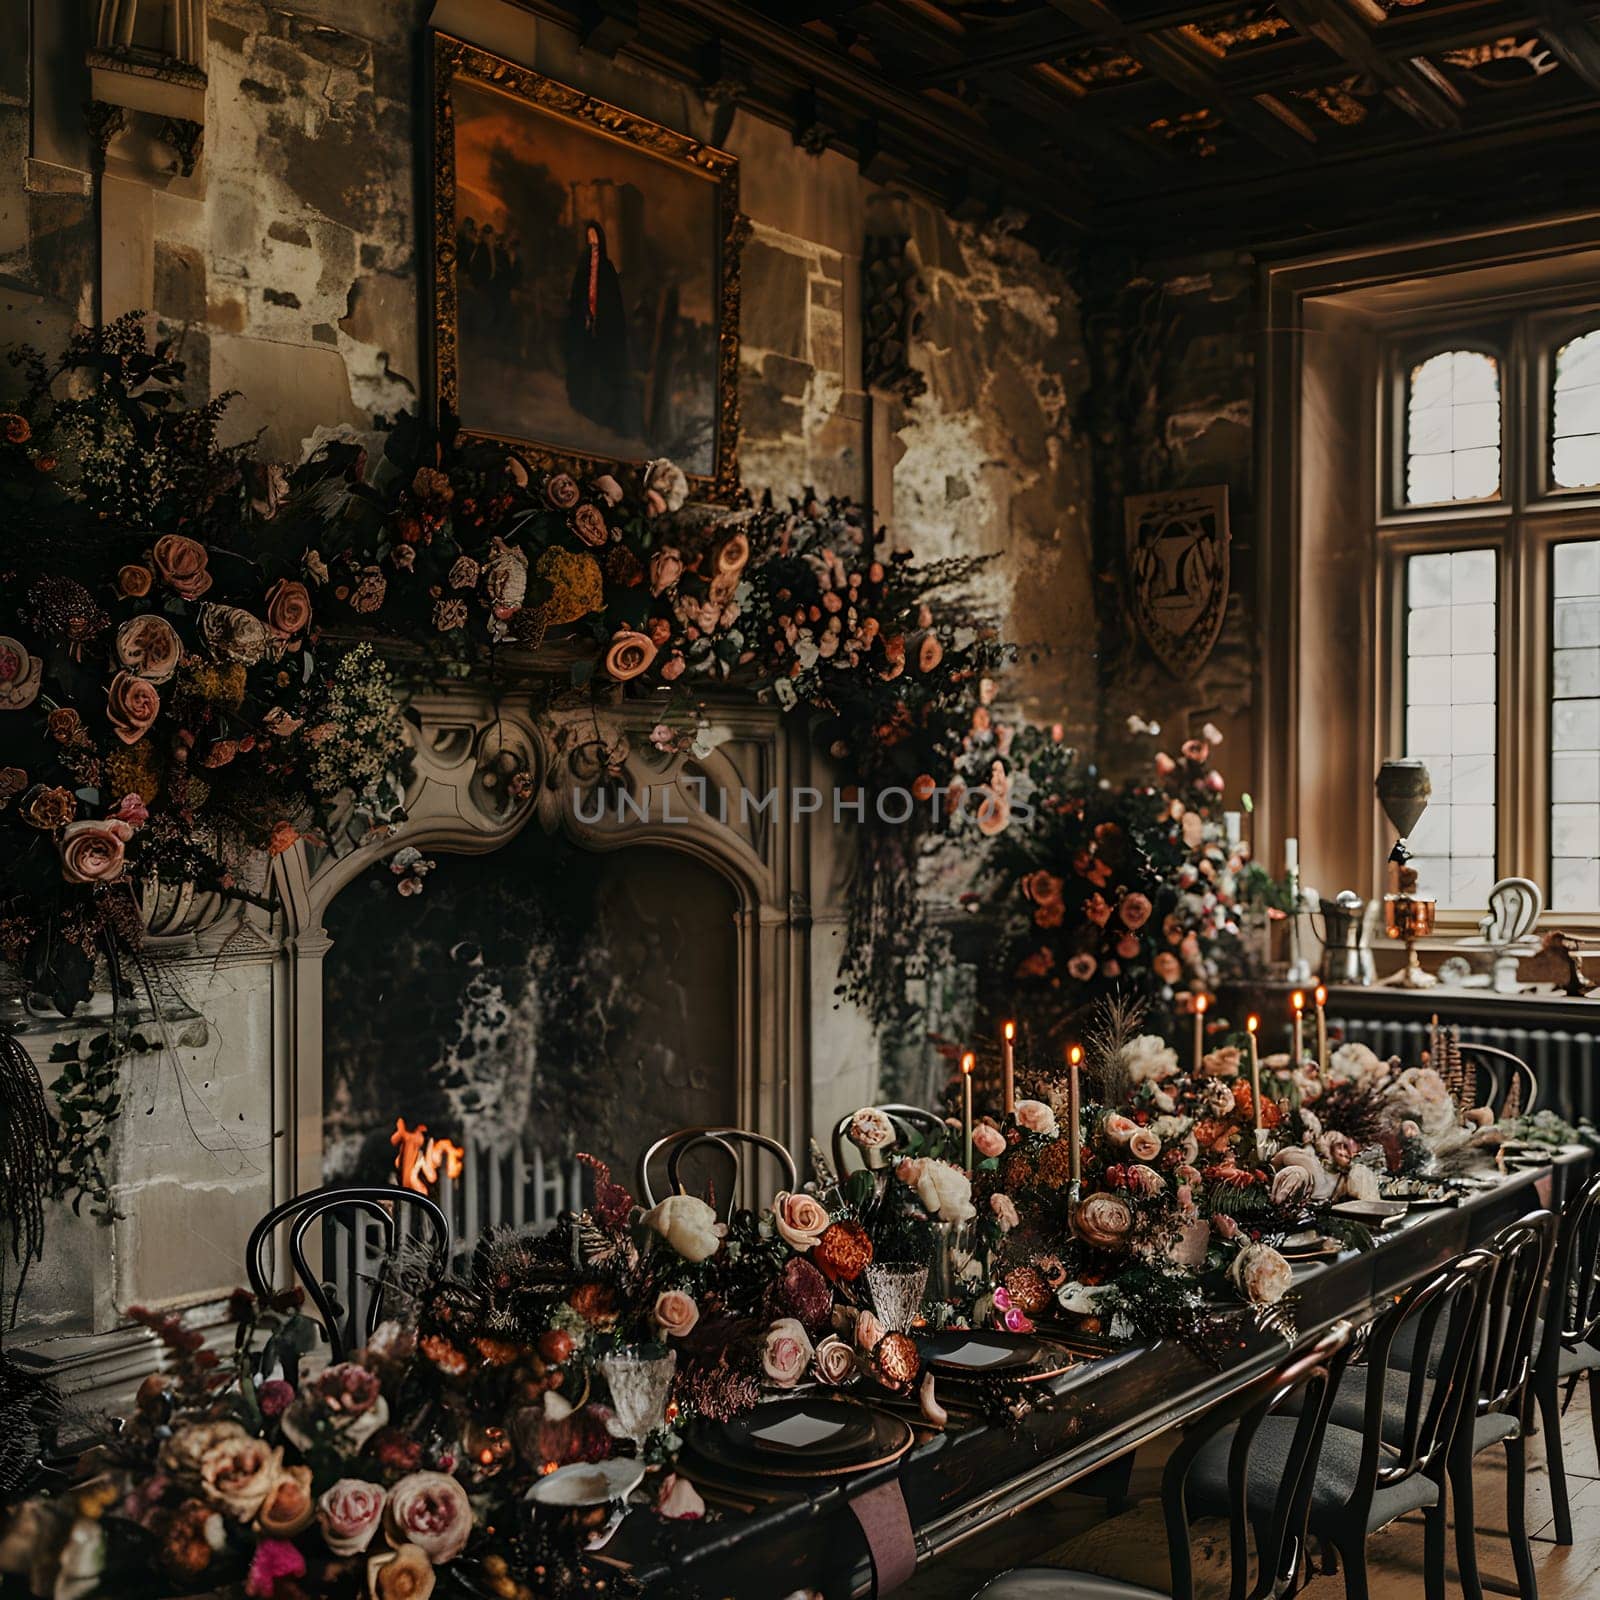 A long table with candles and flowers by a window in an event room by Nadtochiy